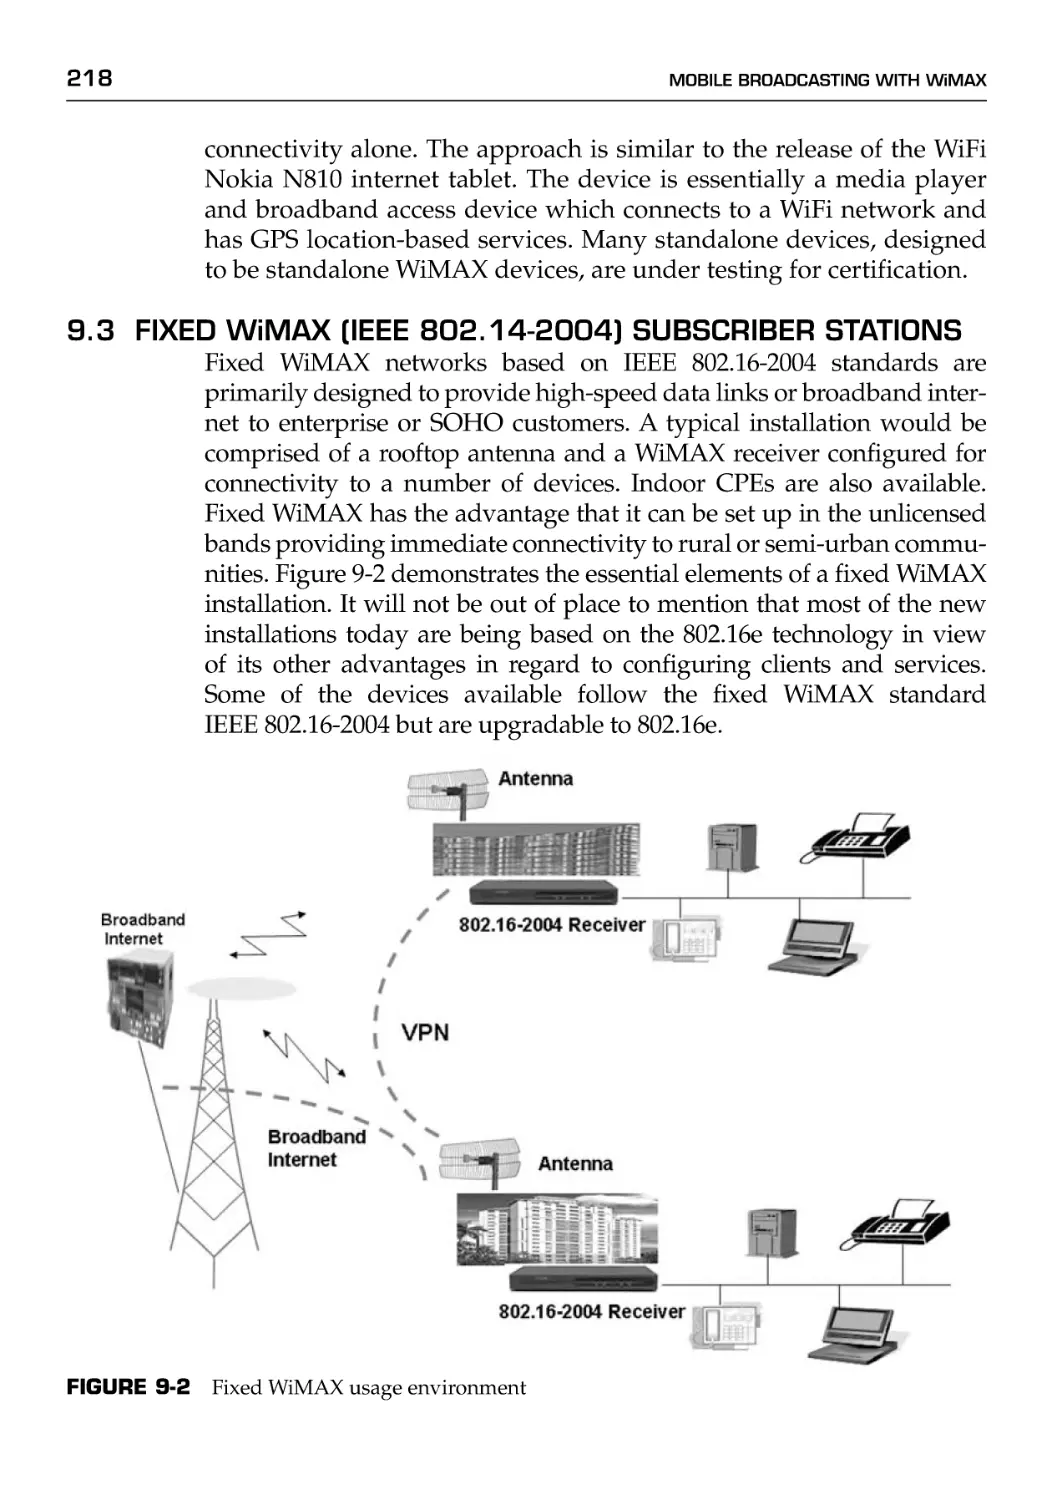 9.3 Fixed WiMAX (IEEE 802.16-2004) Subscriber Stations